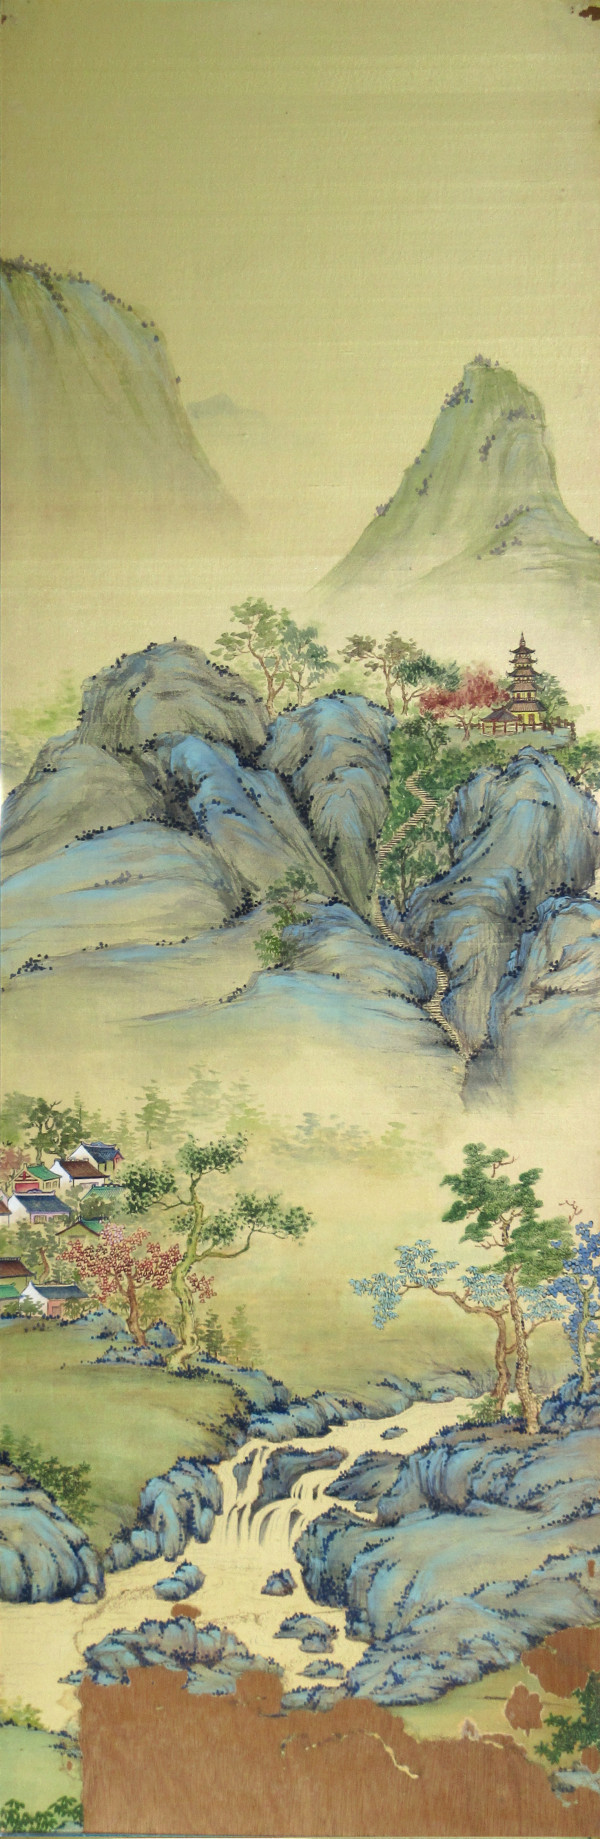 Landscape Panel 3 of 4 by Yee Wah Jung Attributed